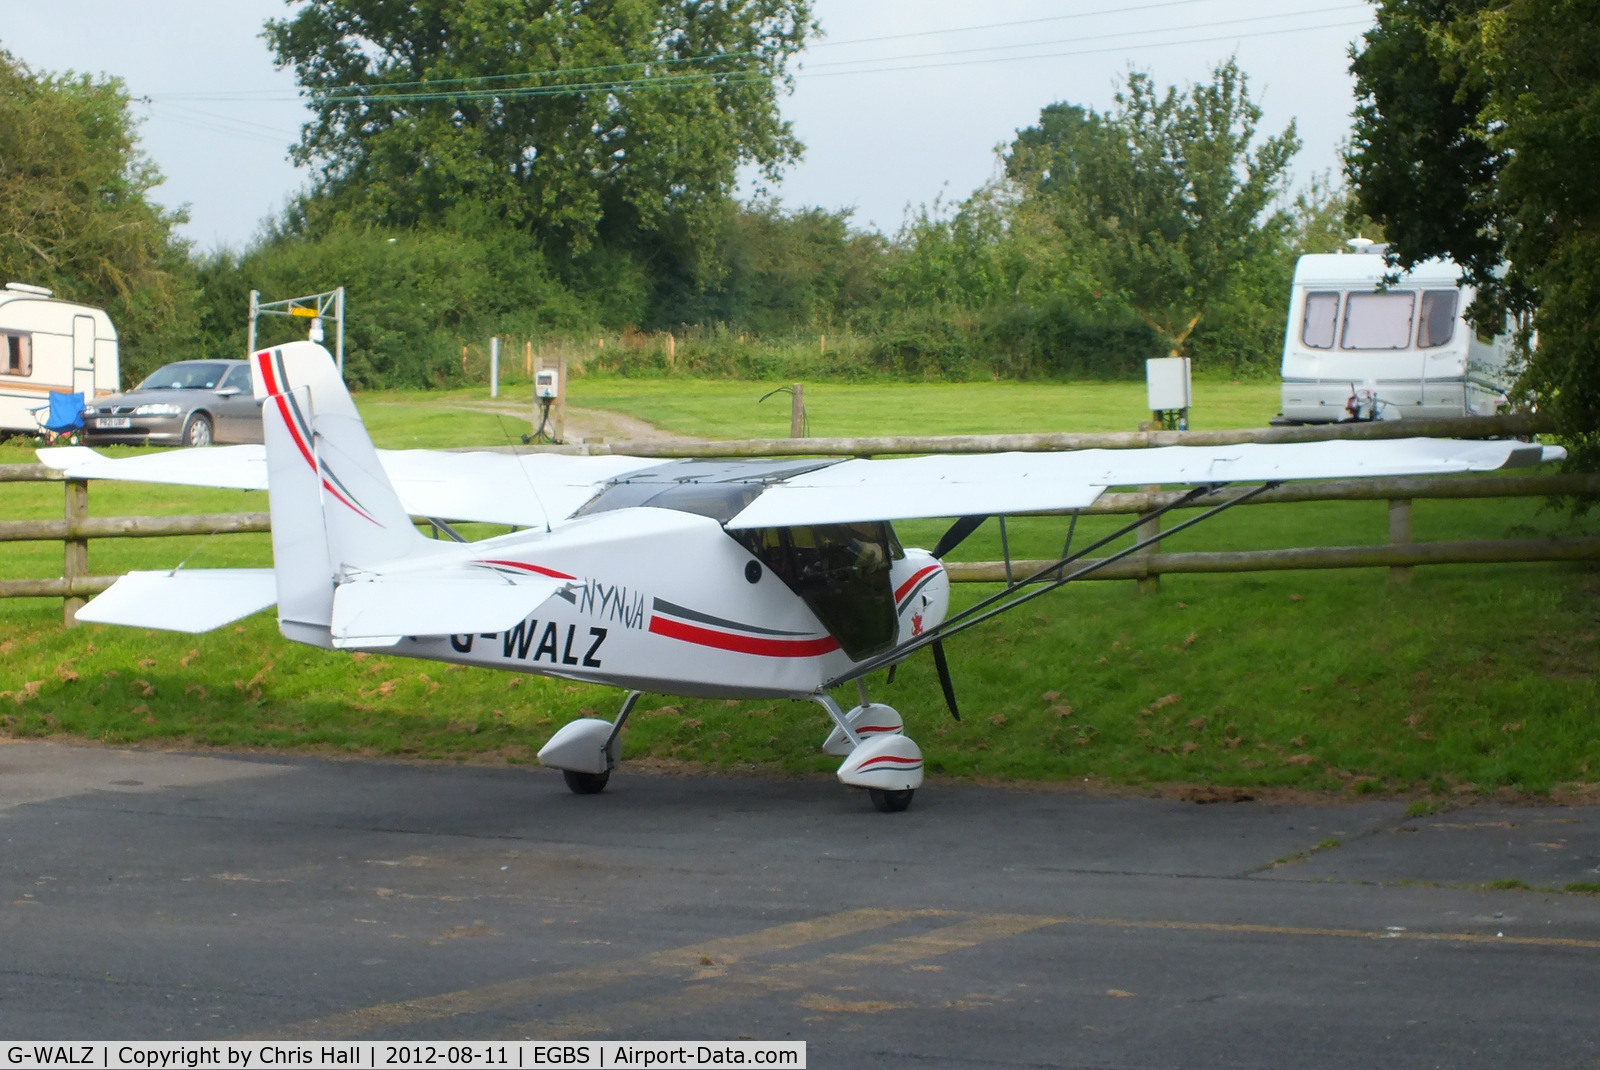 G-WALZ, 2012 Best Off Nynja 912S C/N BMAA/HB/619, at Shobdon Airfield, Herefordshire